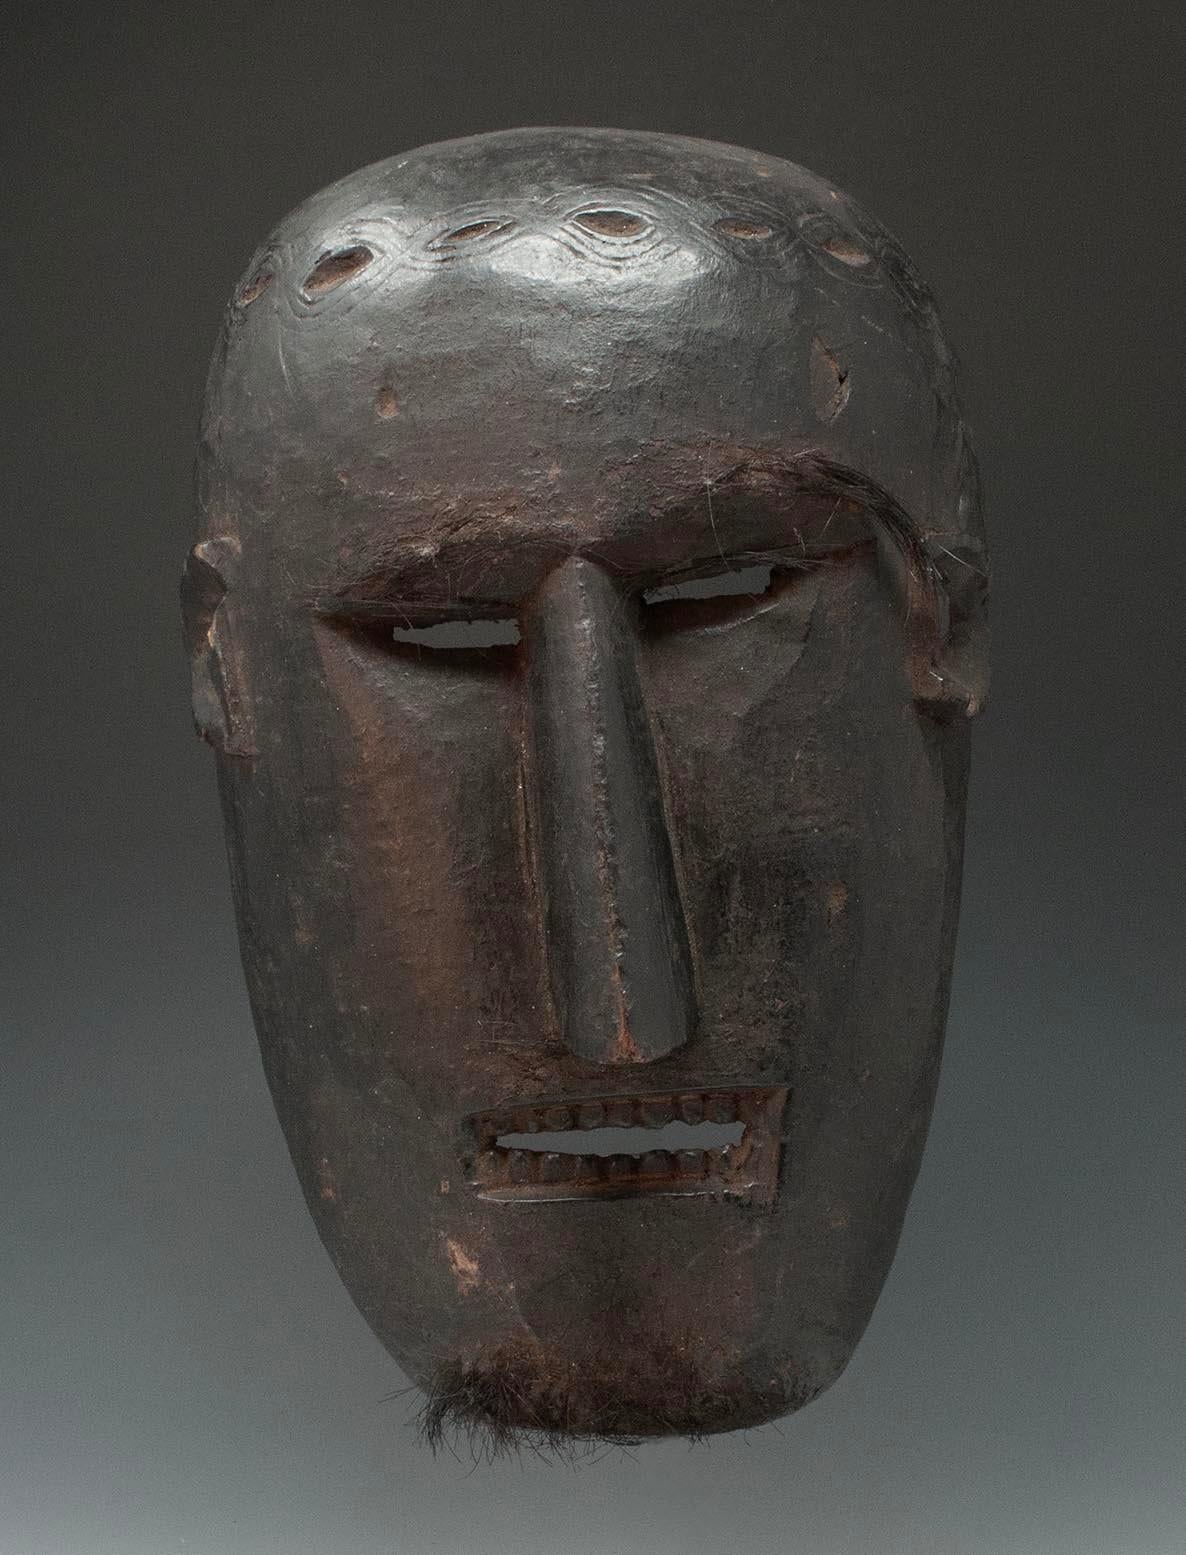 Late 19th-early 20th century Tribal mask, West Nepal

A mask from West Nepal with a sharp straight nose, squinting eyes and a square mouth showing upper and lower teeth. There are remnants of applied hair on the chine and near the eyes. Across the